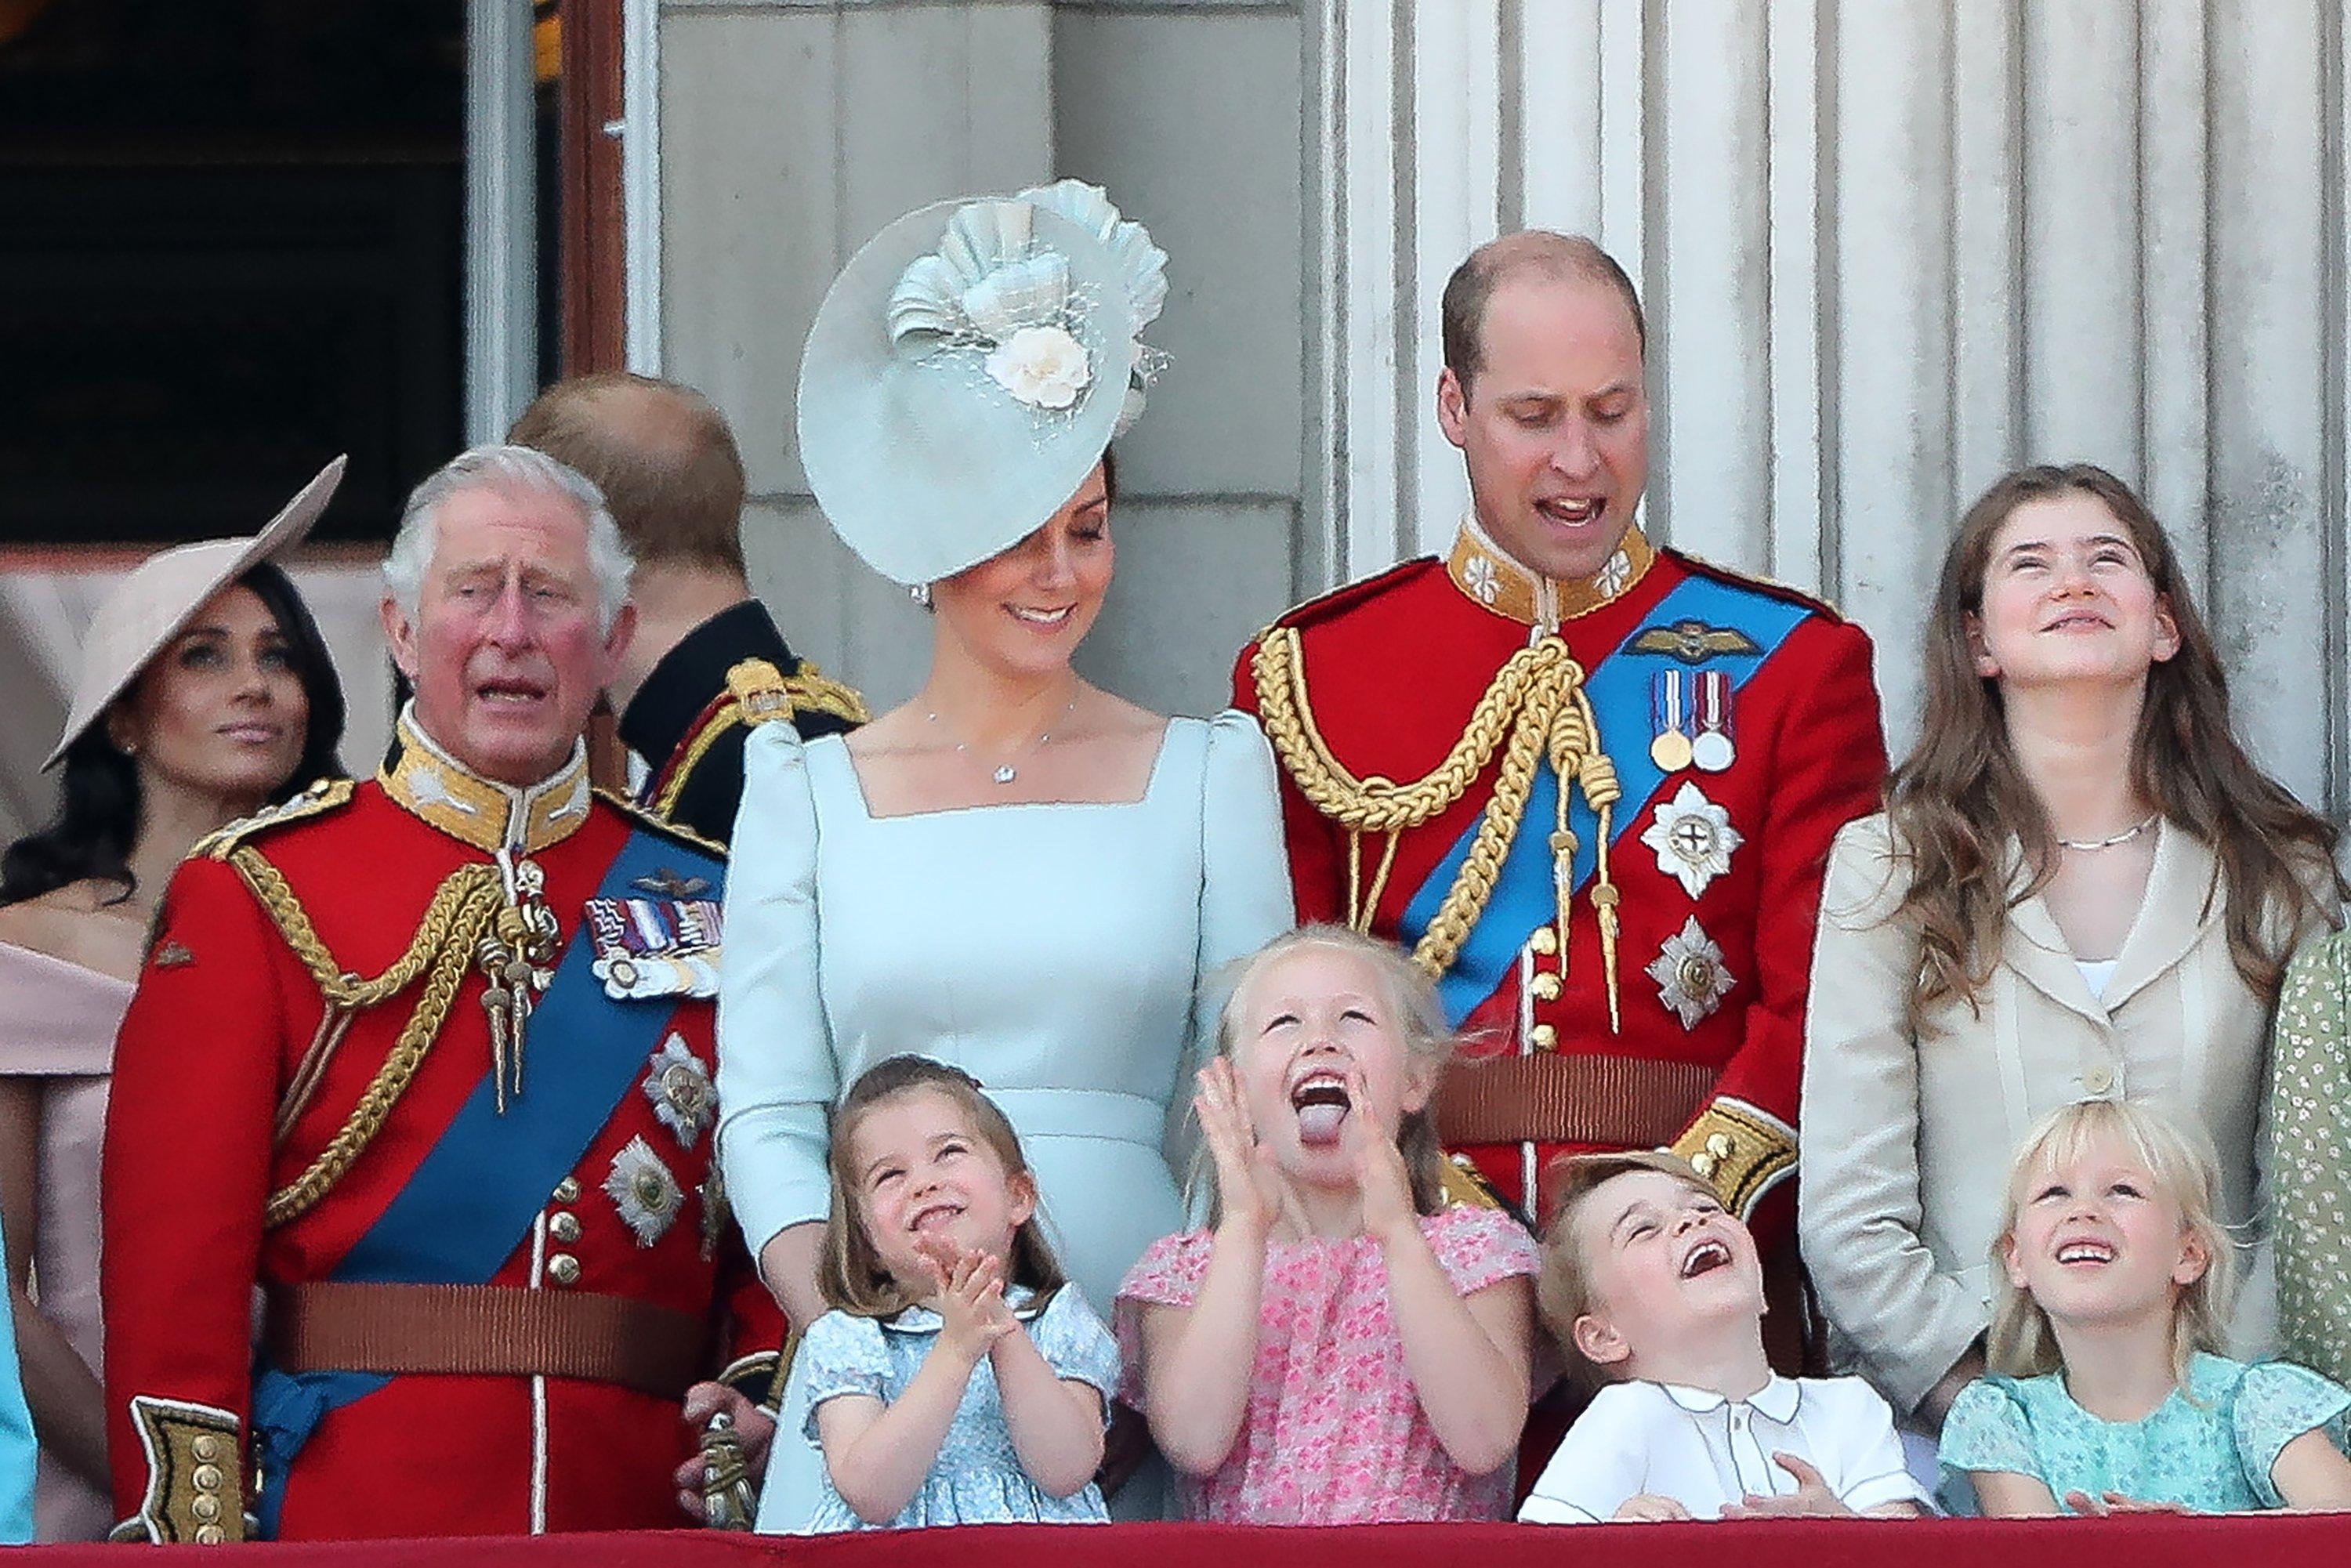 Prince Charles' 70th Birthday Photo Features Giggling Prince George